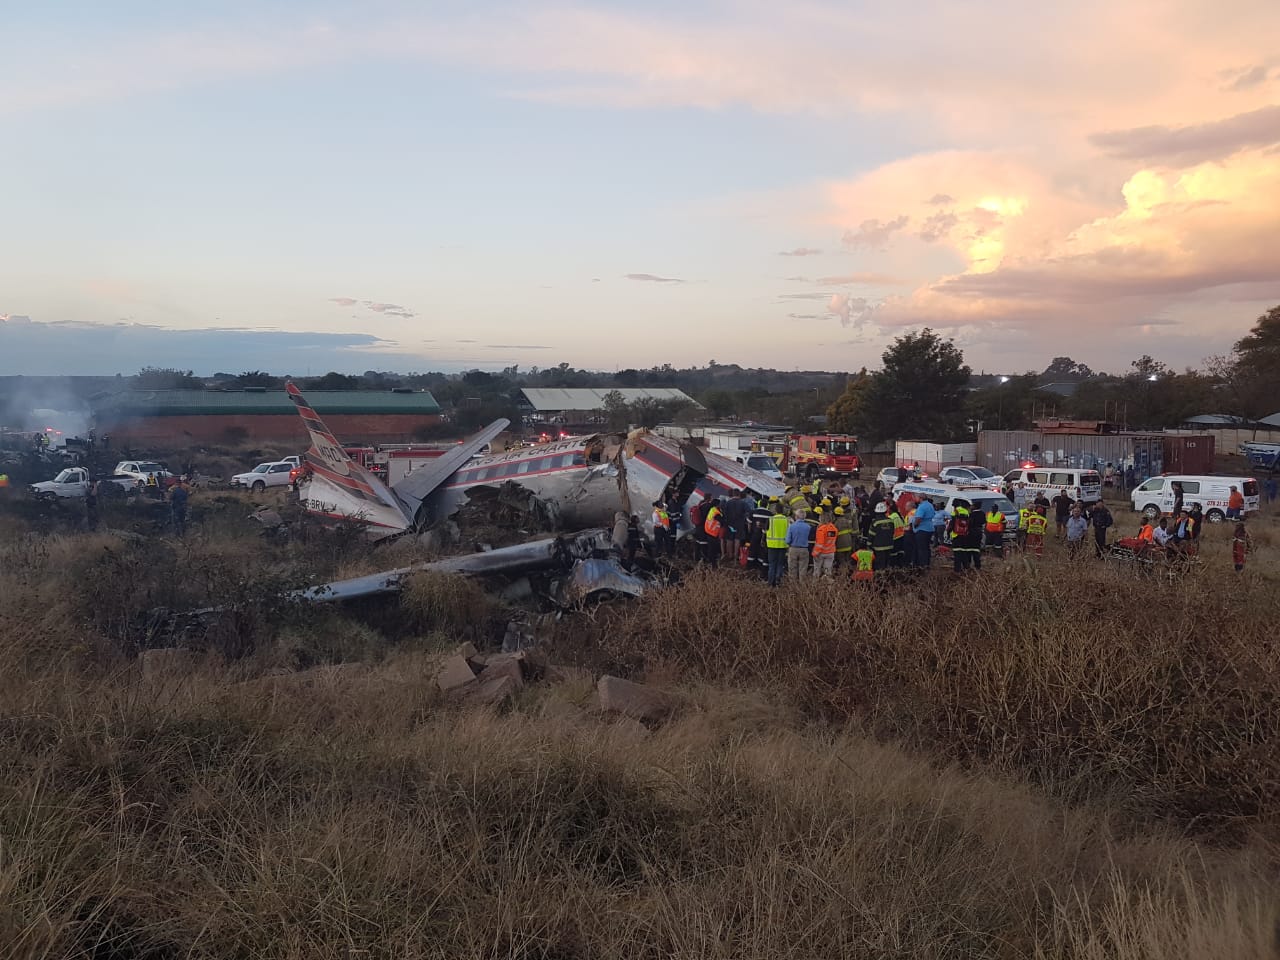 Aircraft crash leaves one dead and 19 others injured near the Wonderboom airport in Pretoria